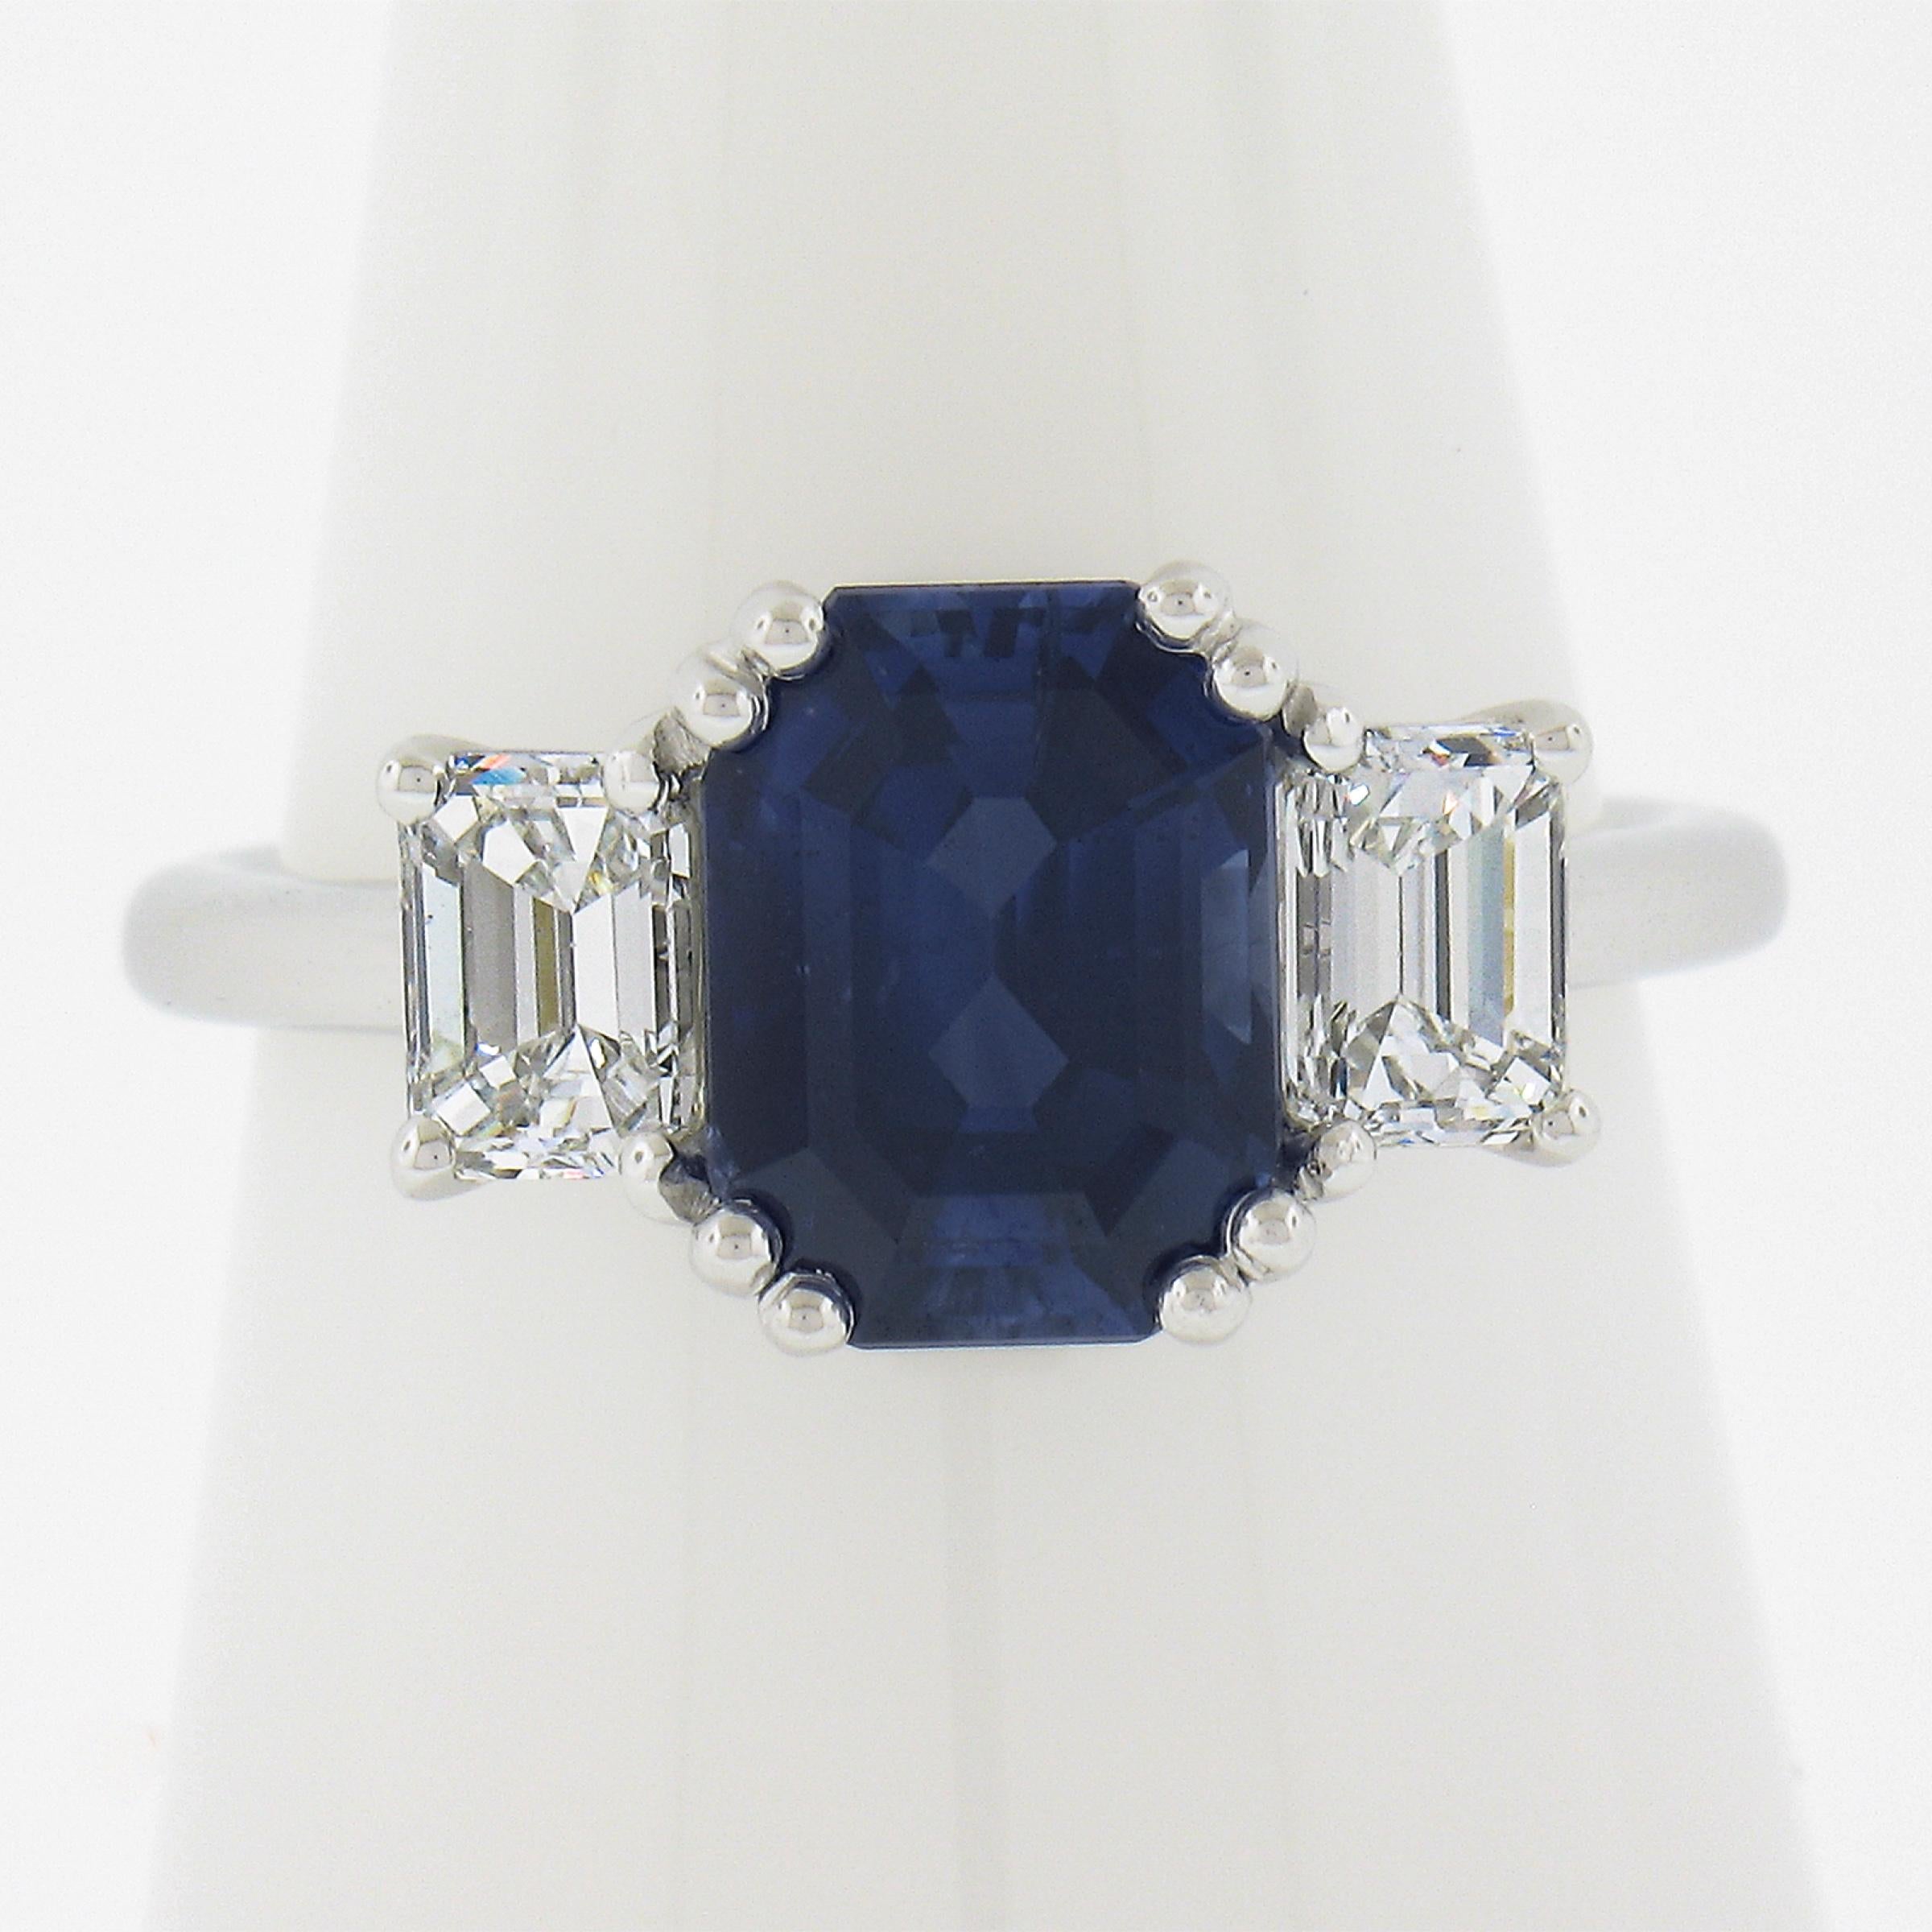 --Stone(s):--
(1) Natural Genuine Sapphire - Octagonal Cut - Prong Set - Royal Blue Color - Heated - 2.62ct (exact - certified)
** See Certification Details Below for Complete Info **
(2) Natural Genuine Diamonds - Emerald Cut - Prong Set - G/H